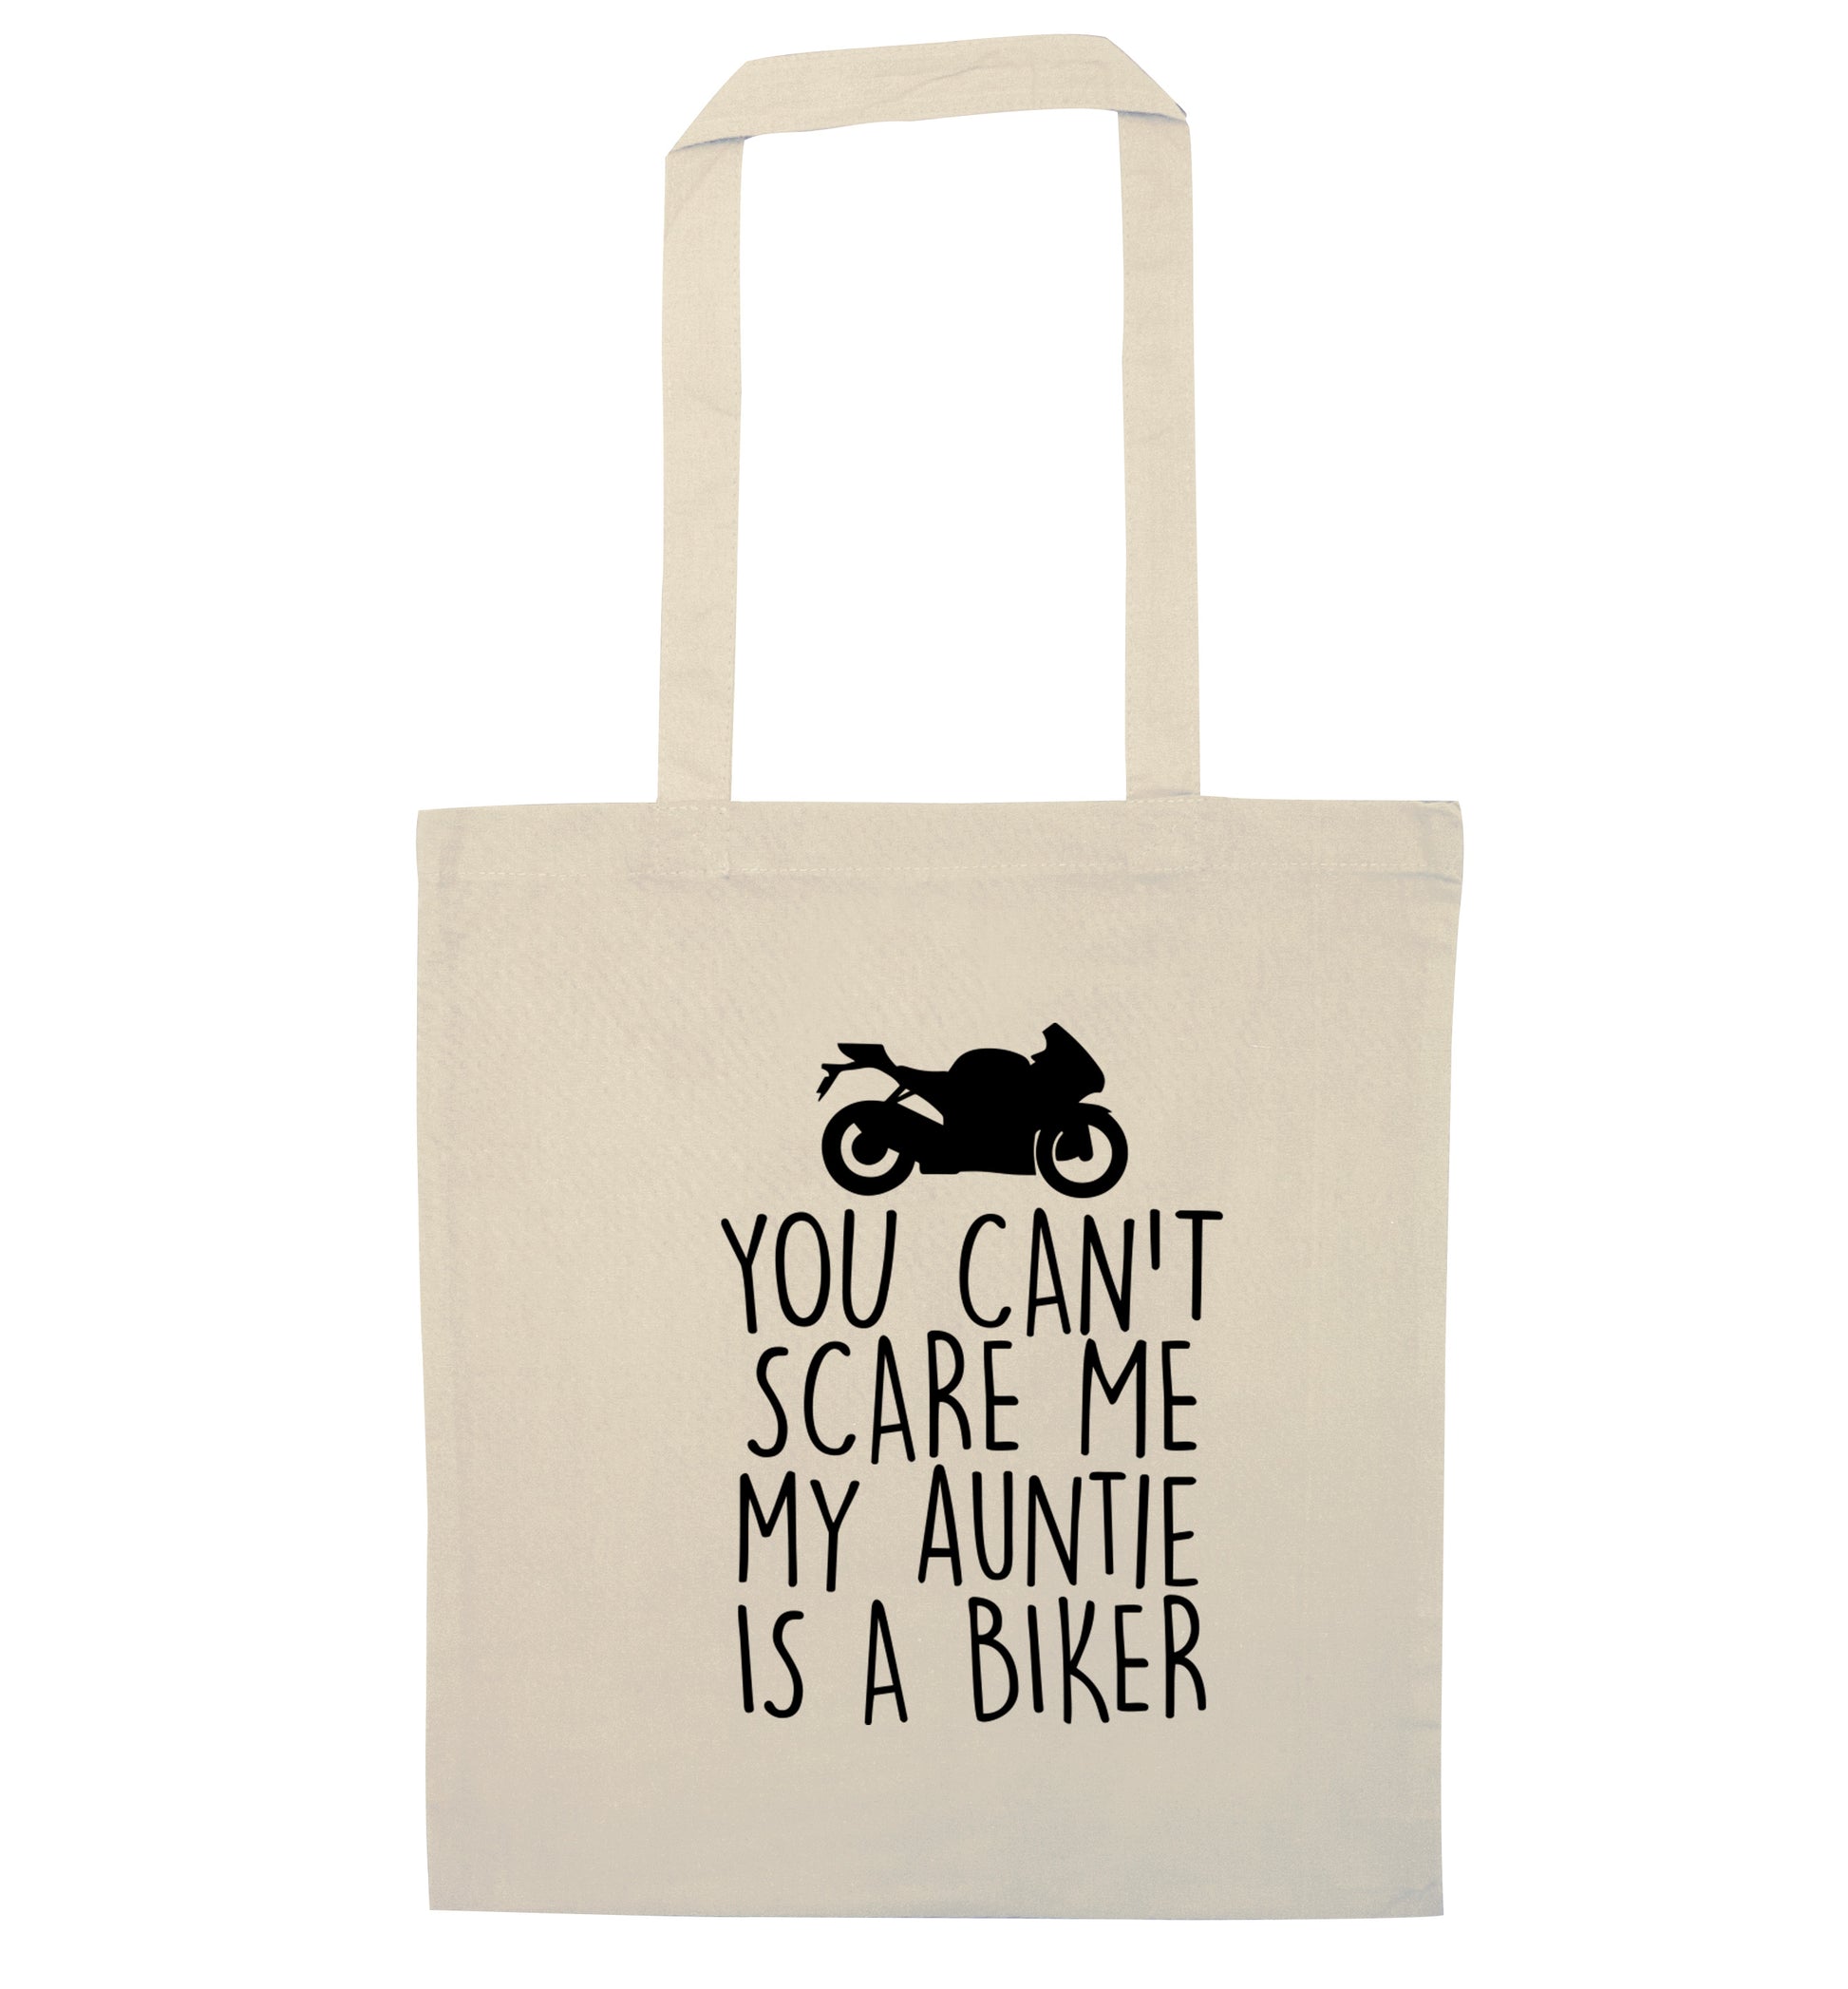 You can't scare me my auntie is a biker natural tote bag